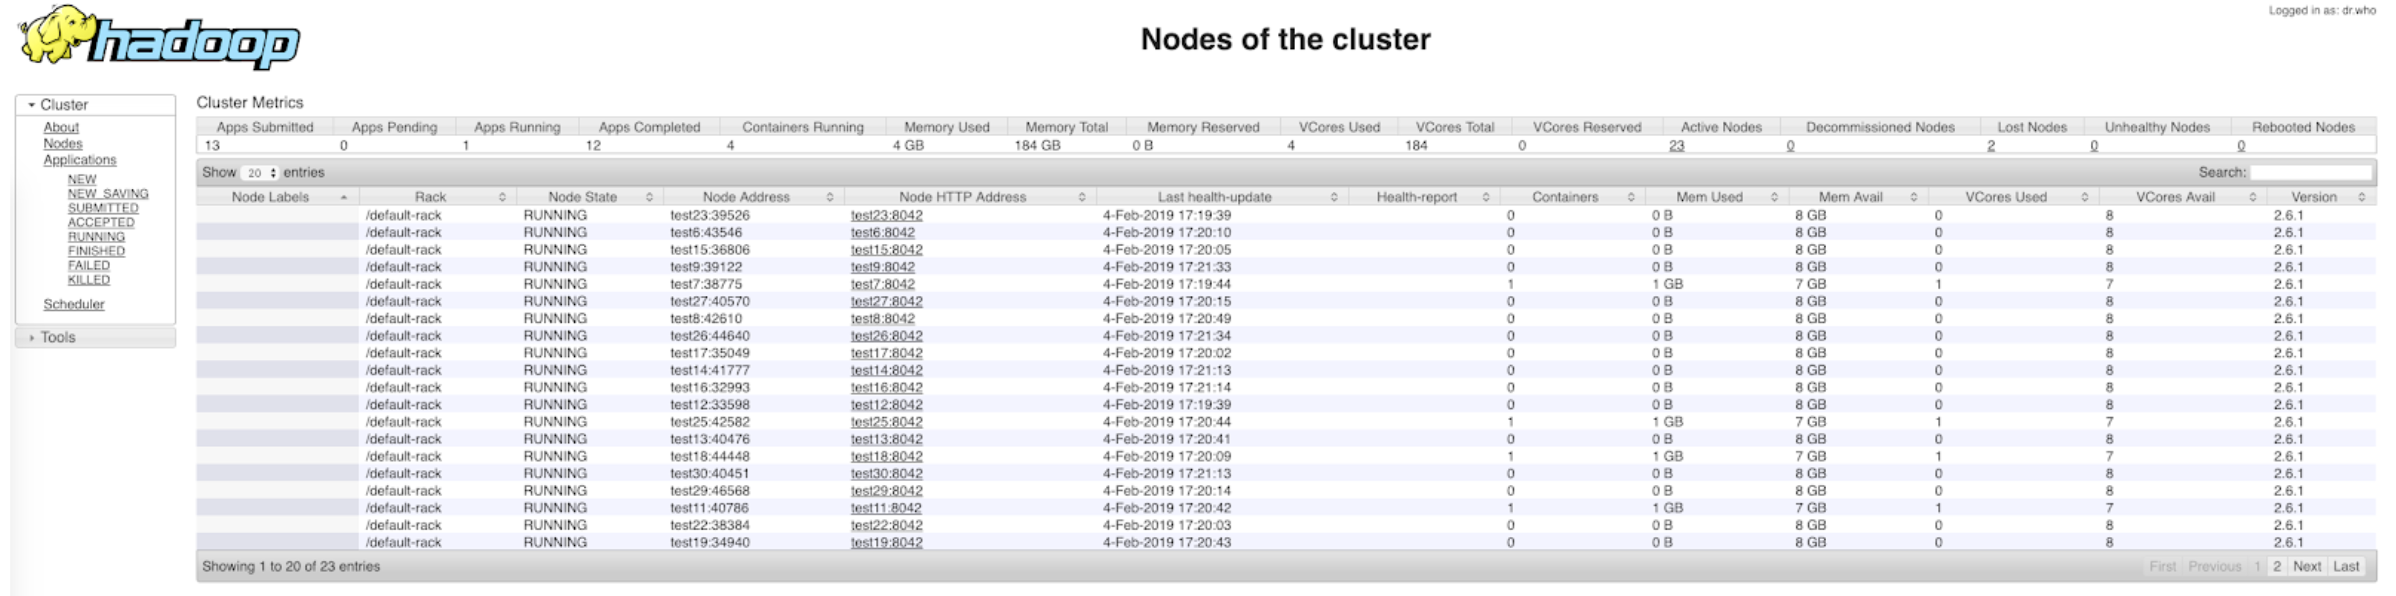 cluster-nodes-example